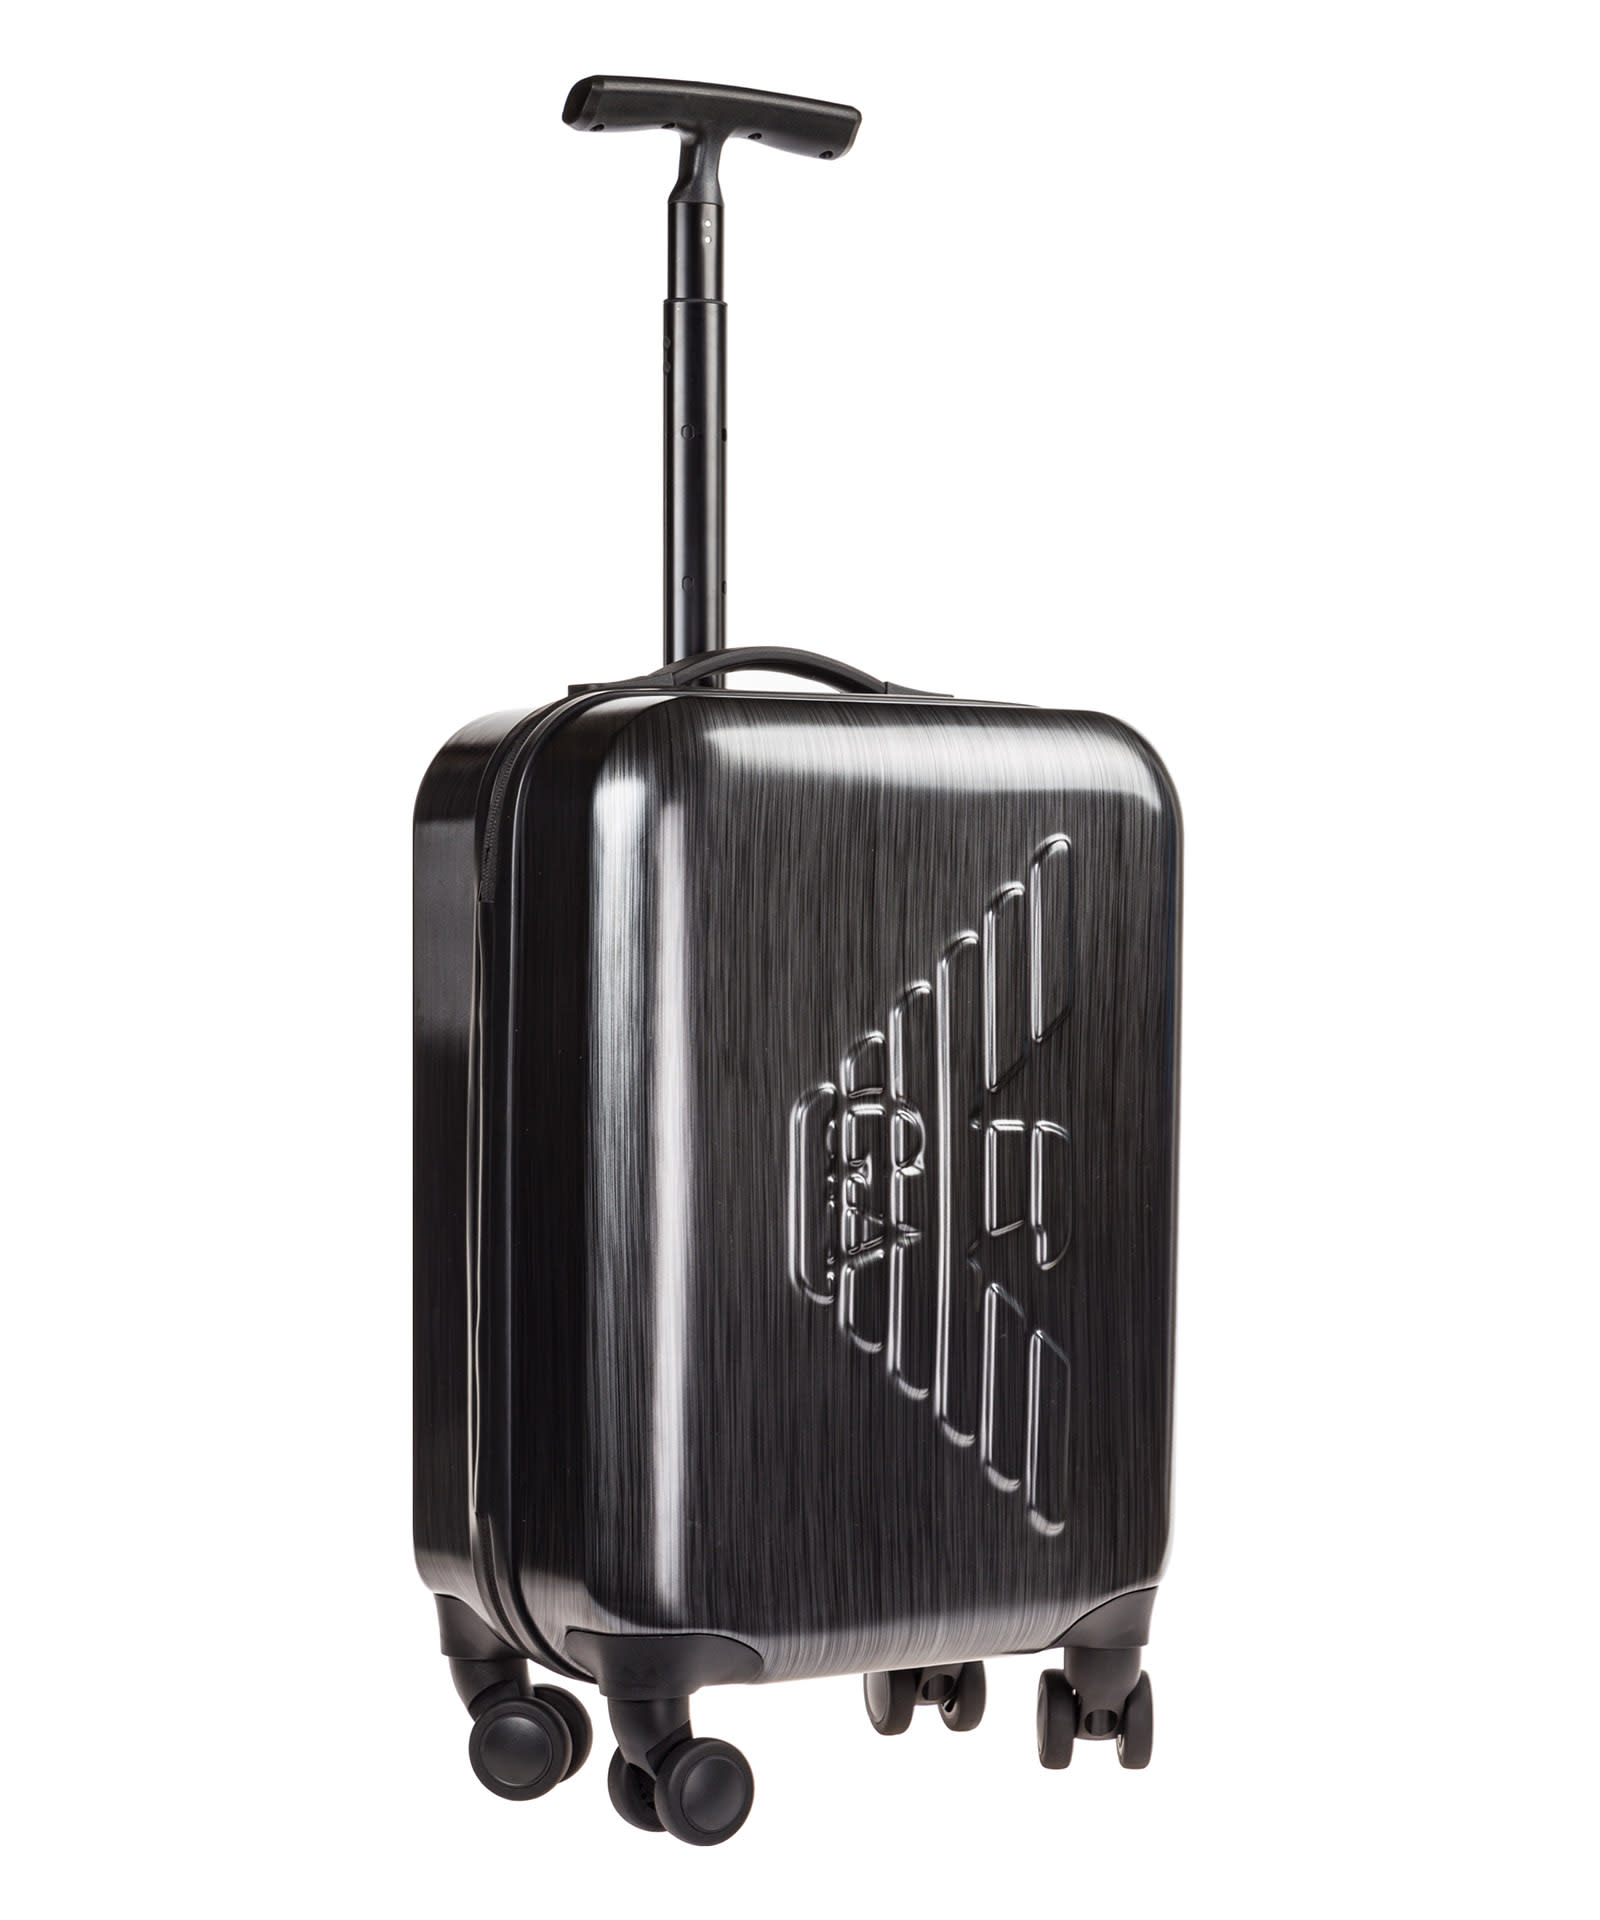 Emporio Armani Carry On Luggage Clearance Cheapest, Save 68% 